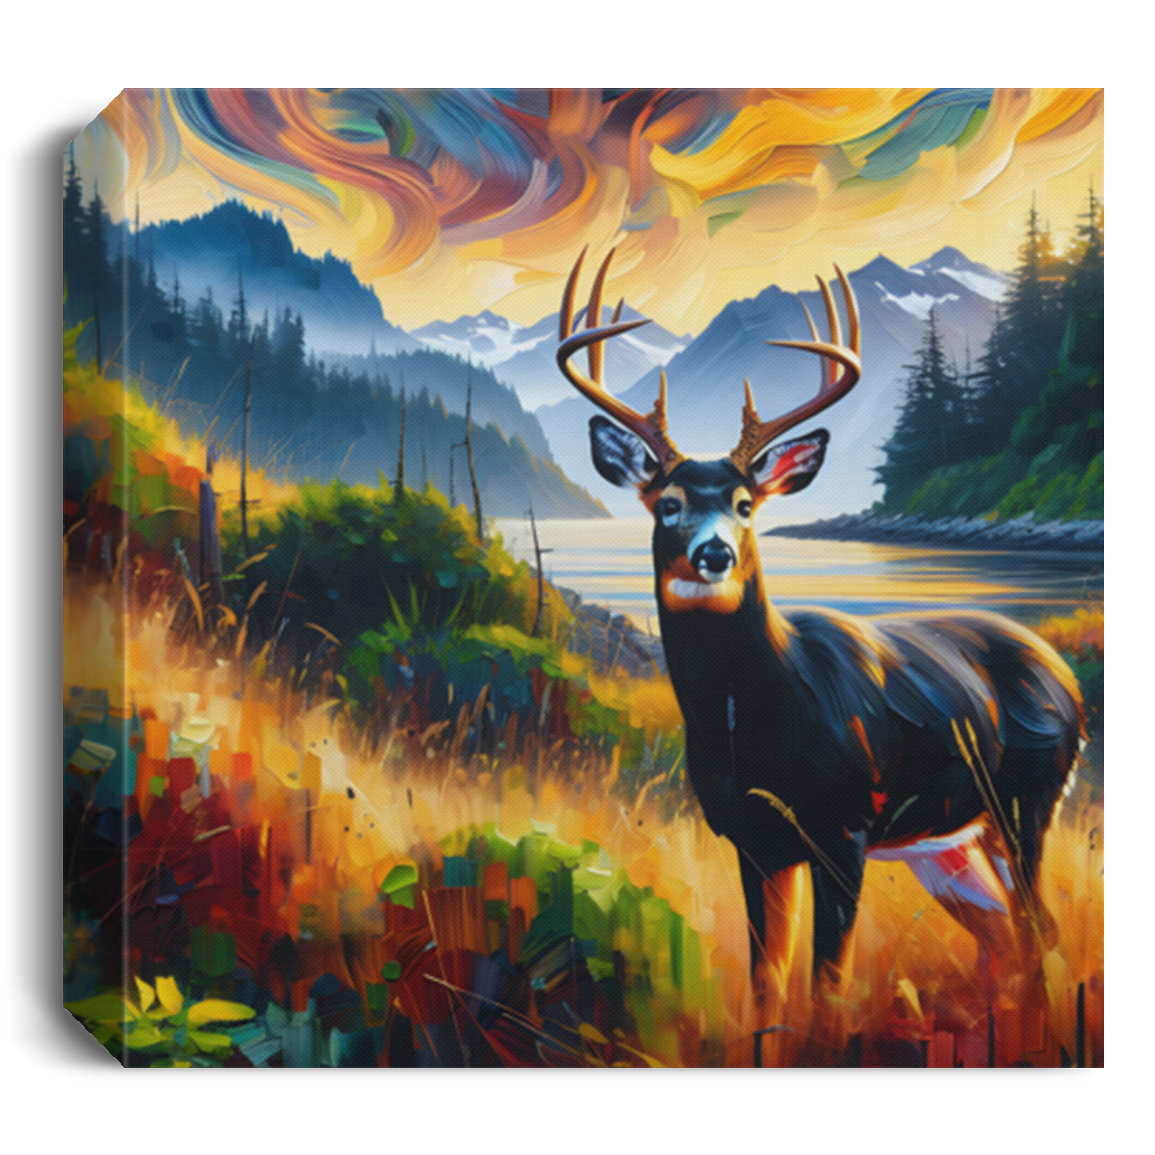 Black Tail Buck in Olympic National Park - Canvas Art Prints